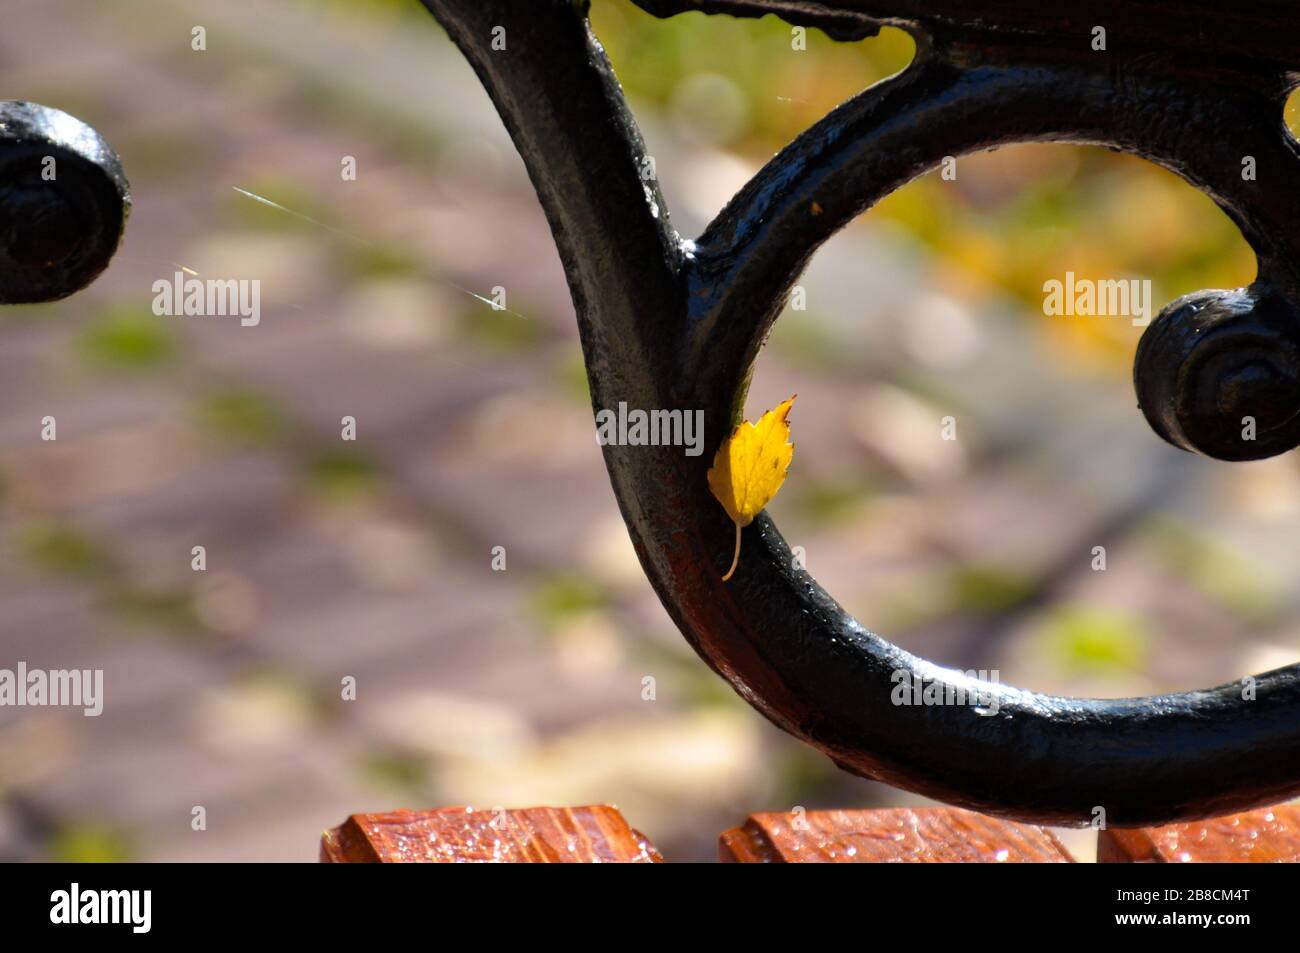 A small fallen yellow birch leaf on the forged figured armrest of the park bench. Stock Photo